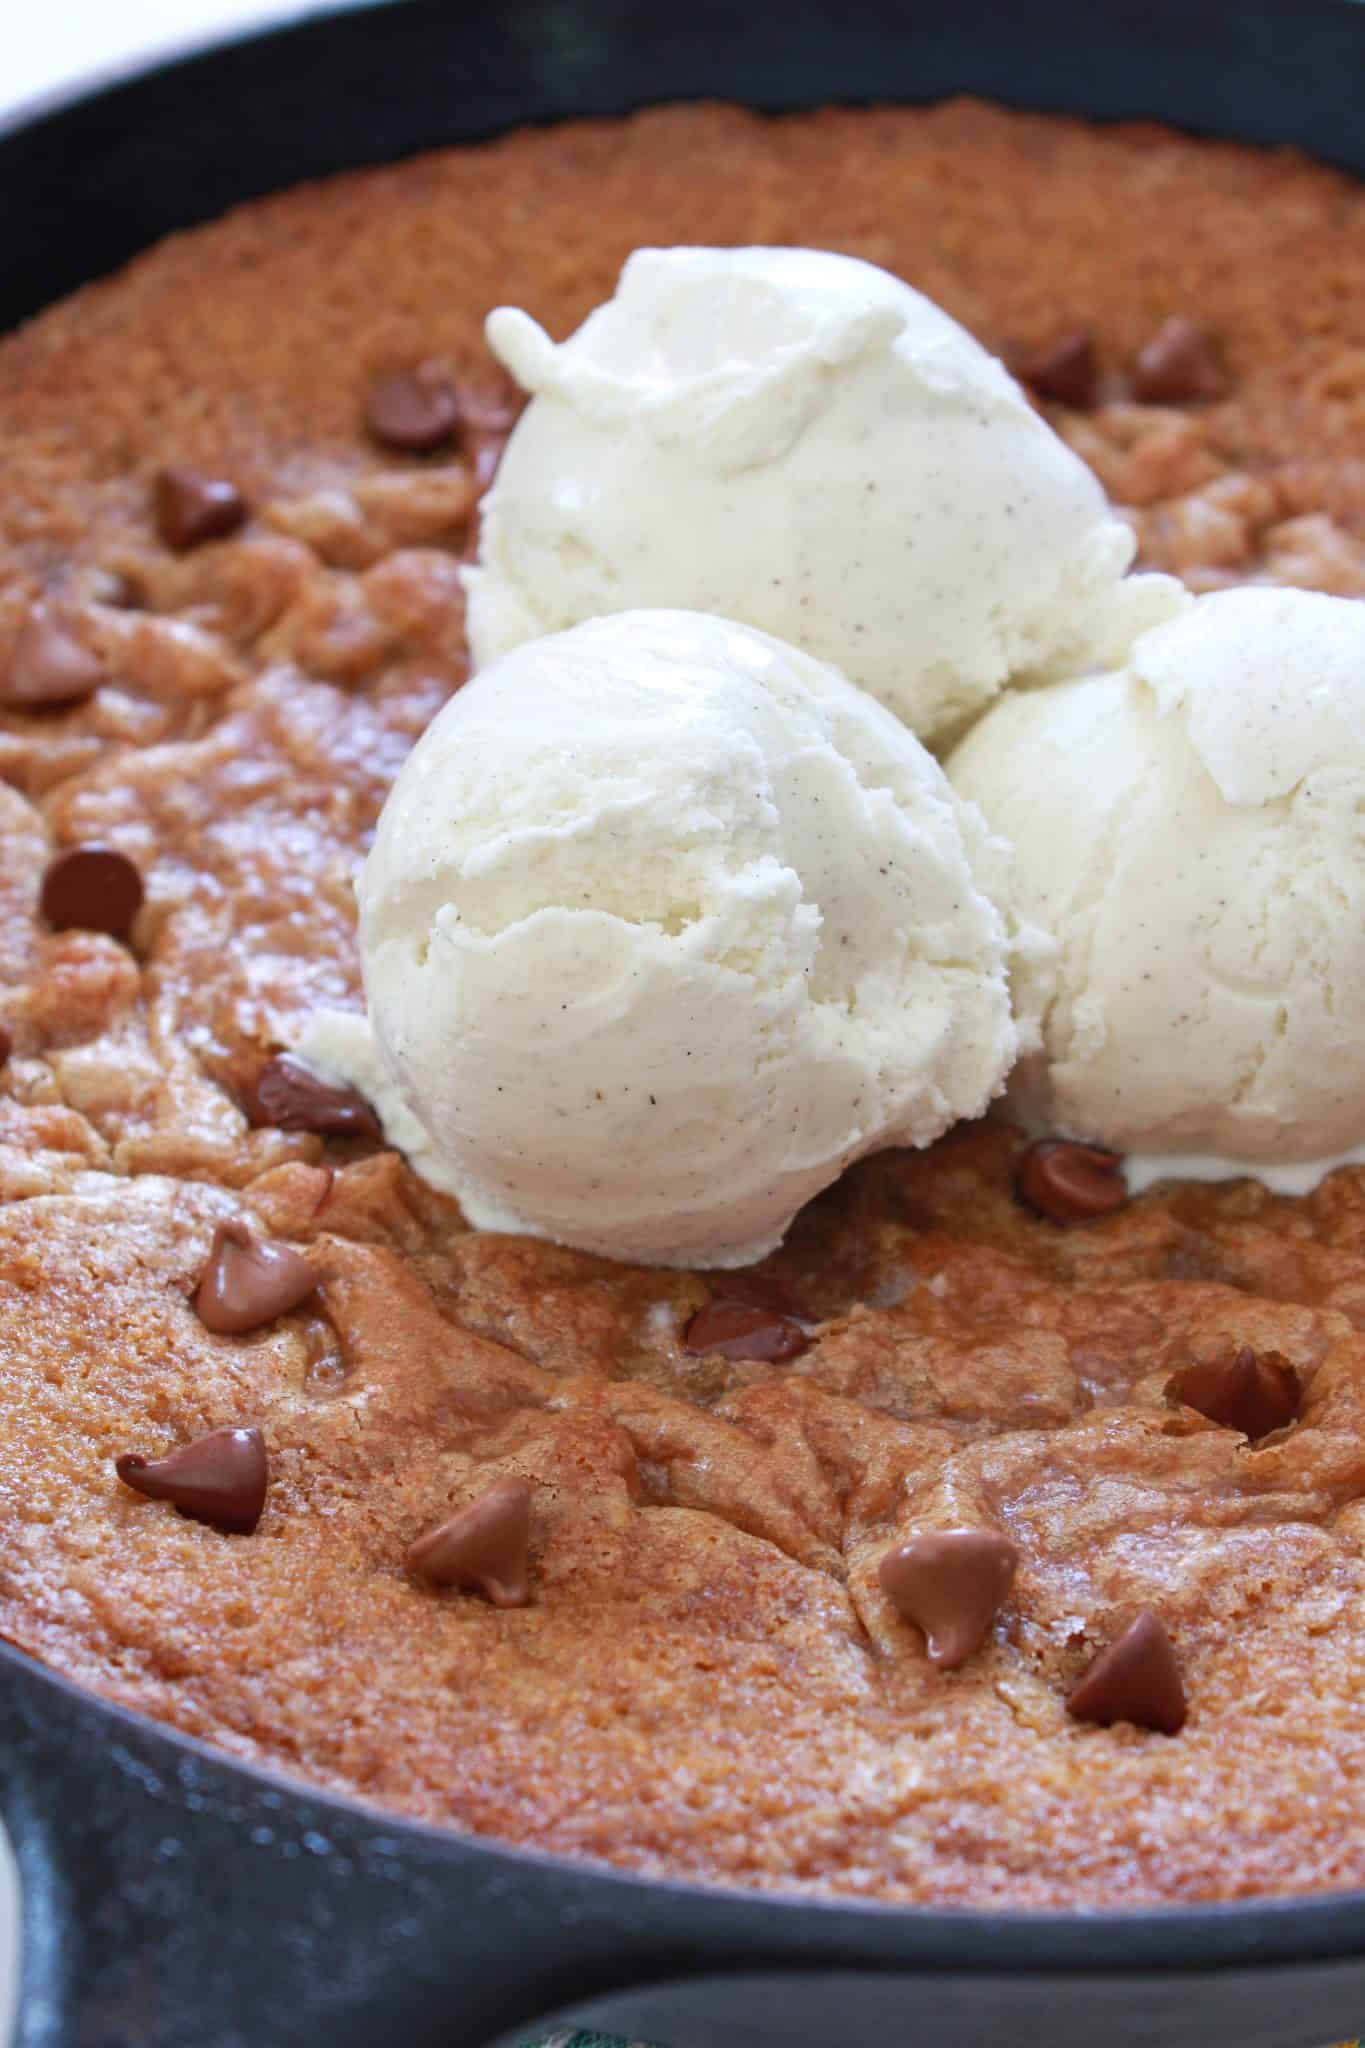 Where to Eat Skillet Cookies in Boston